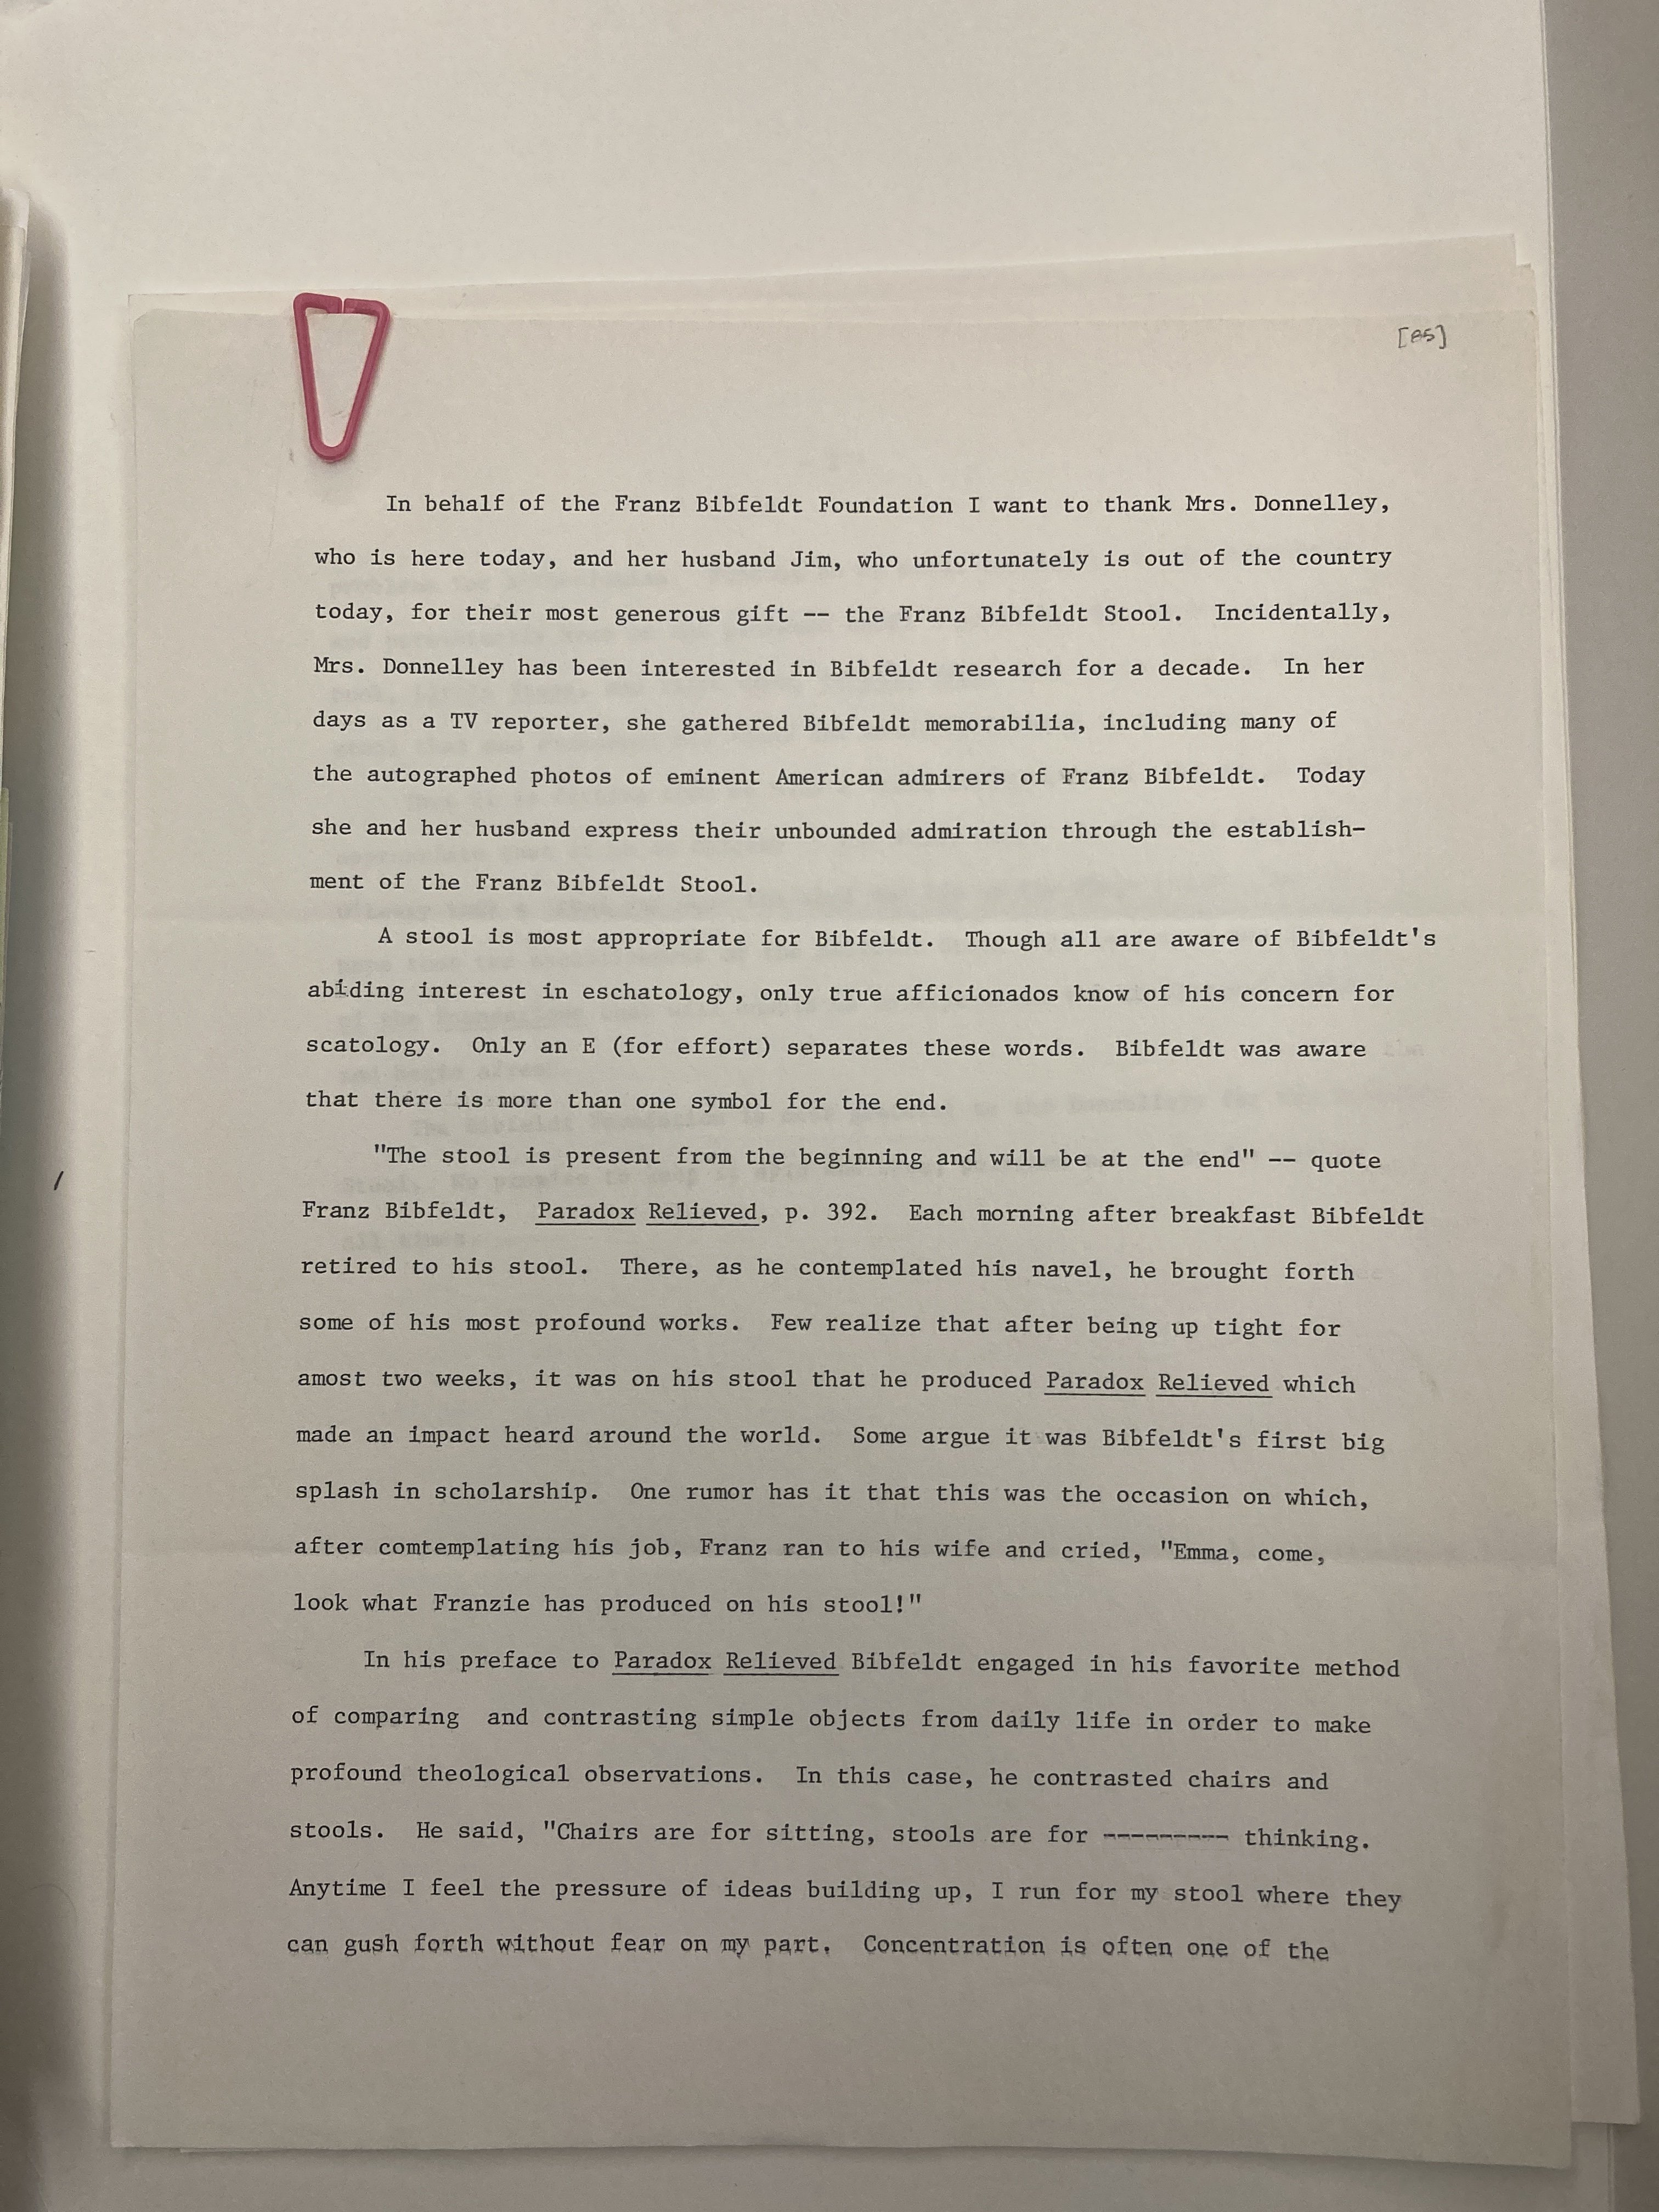 print out of the first page of an acceptance speech by Gerald Brauer